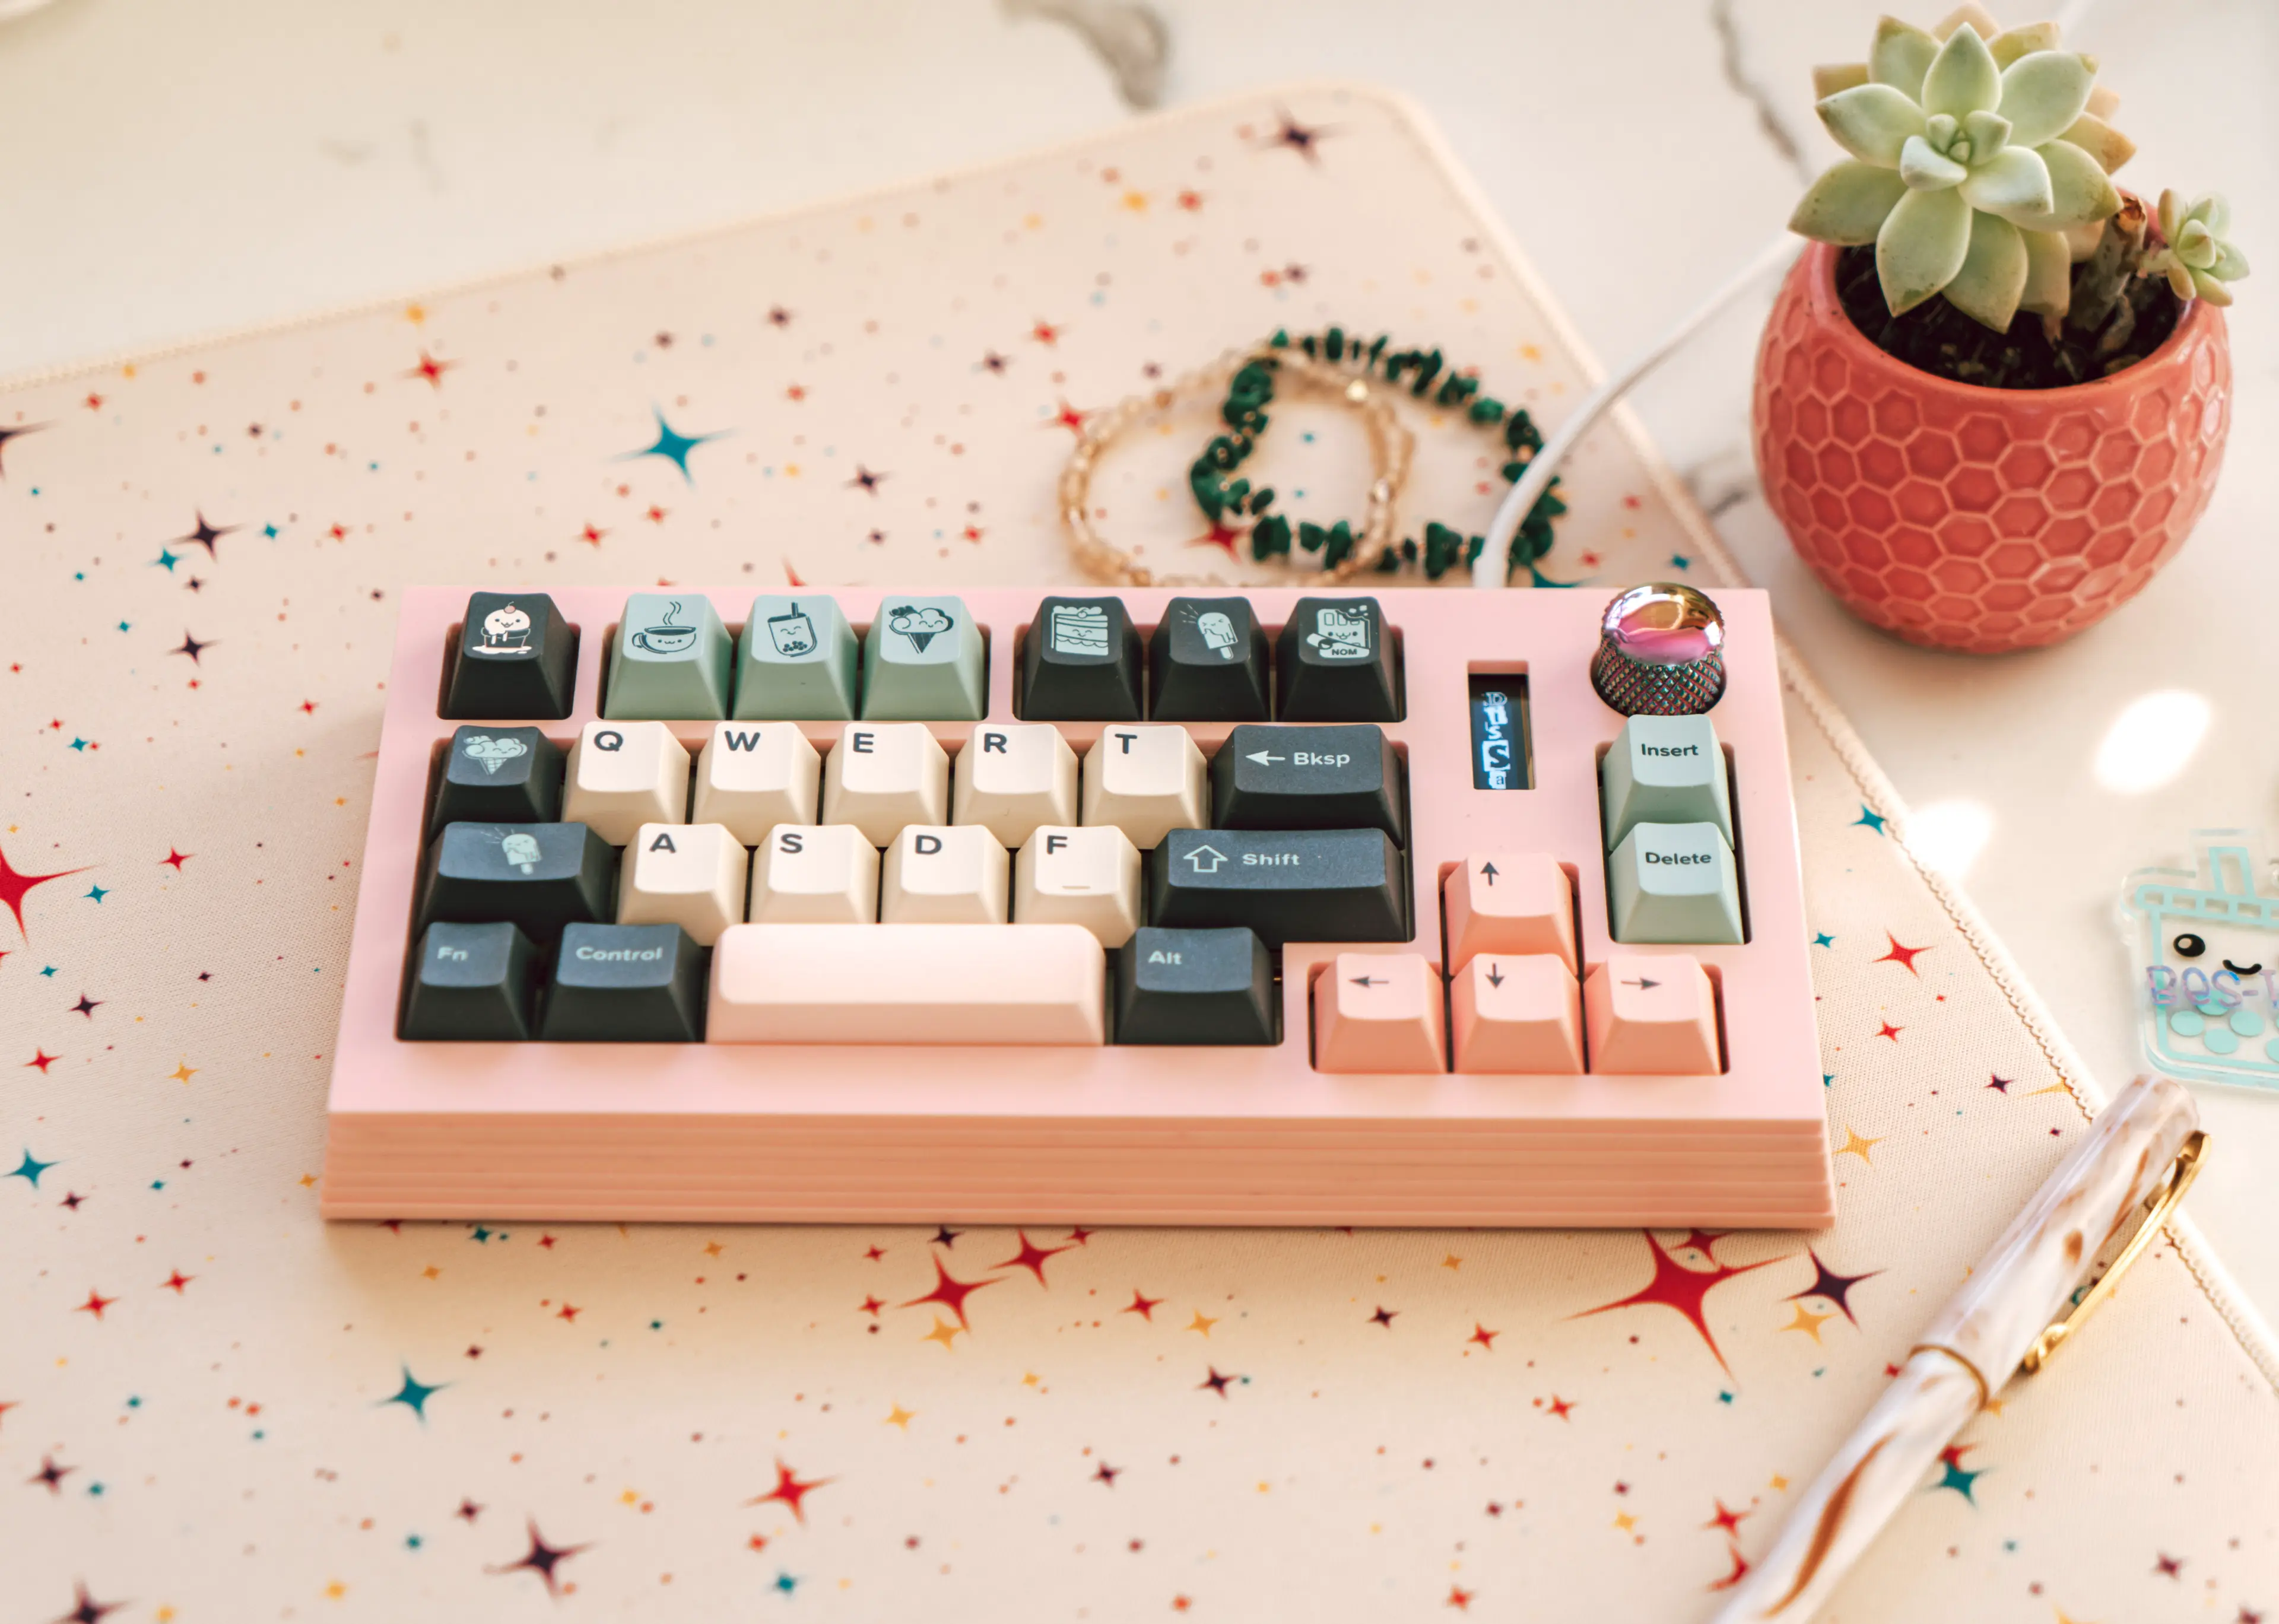 Image of a pink Dissatisfaction30 keyboard